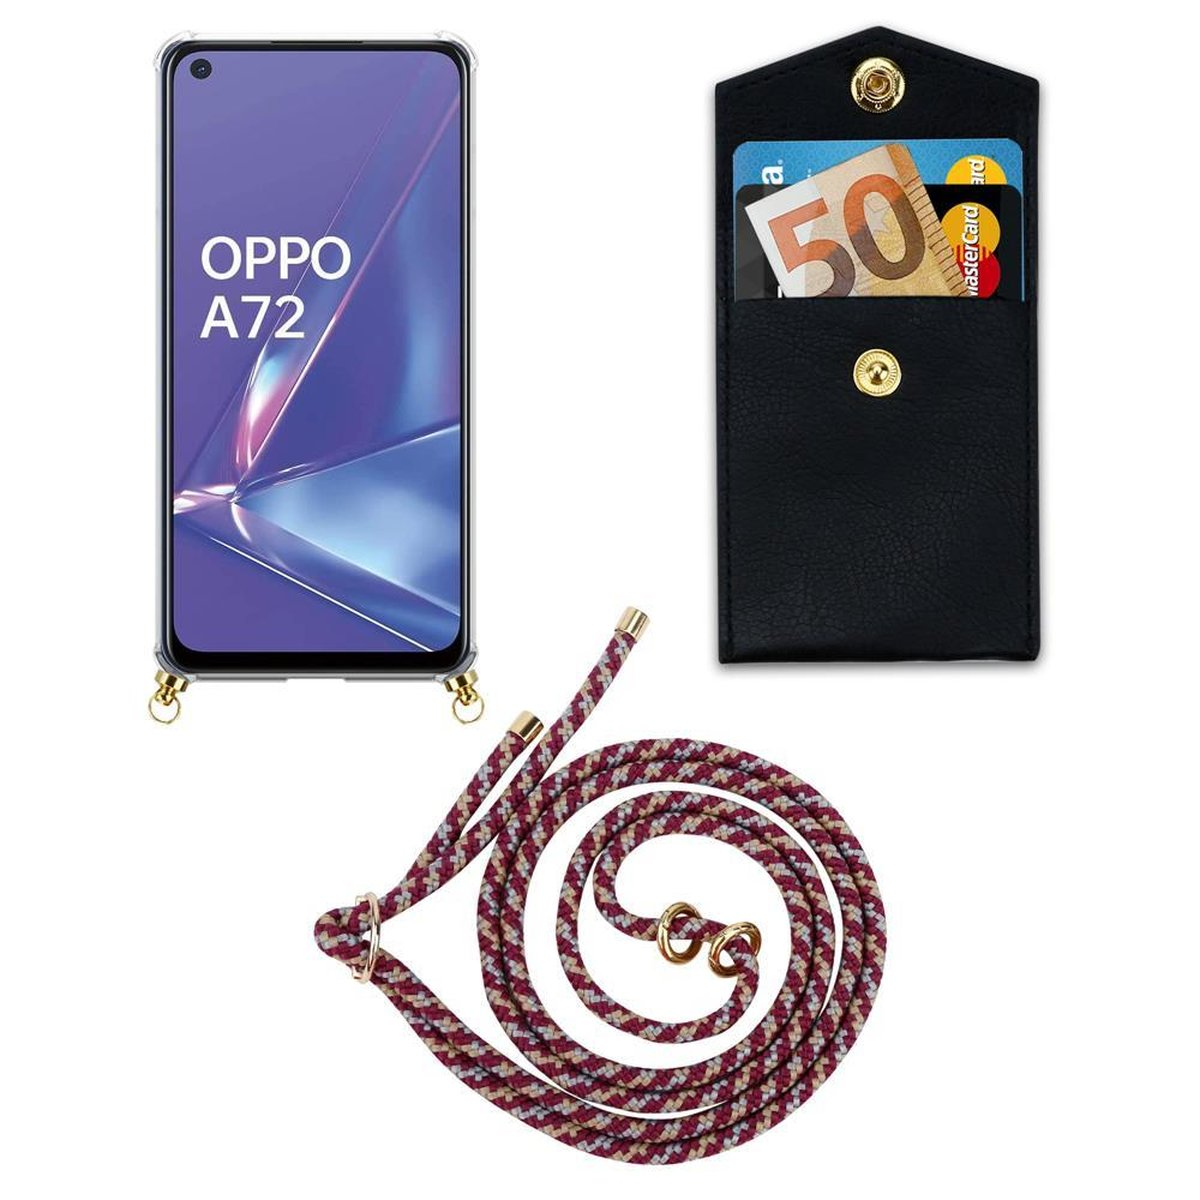 A92, Band Oppo, Hülle, Ringen, Handy GELB und ROT Kette abnehmbarer Gold WEIß Backcover, Kordel mit CADORABO